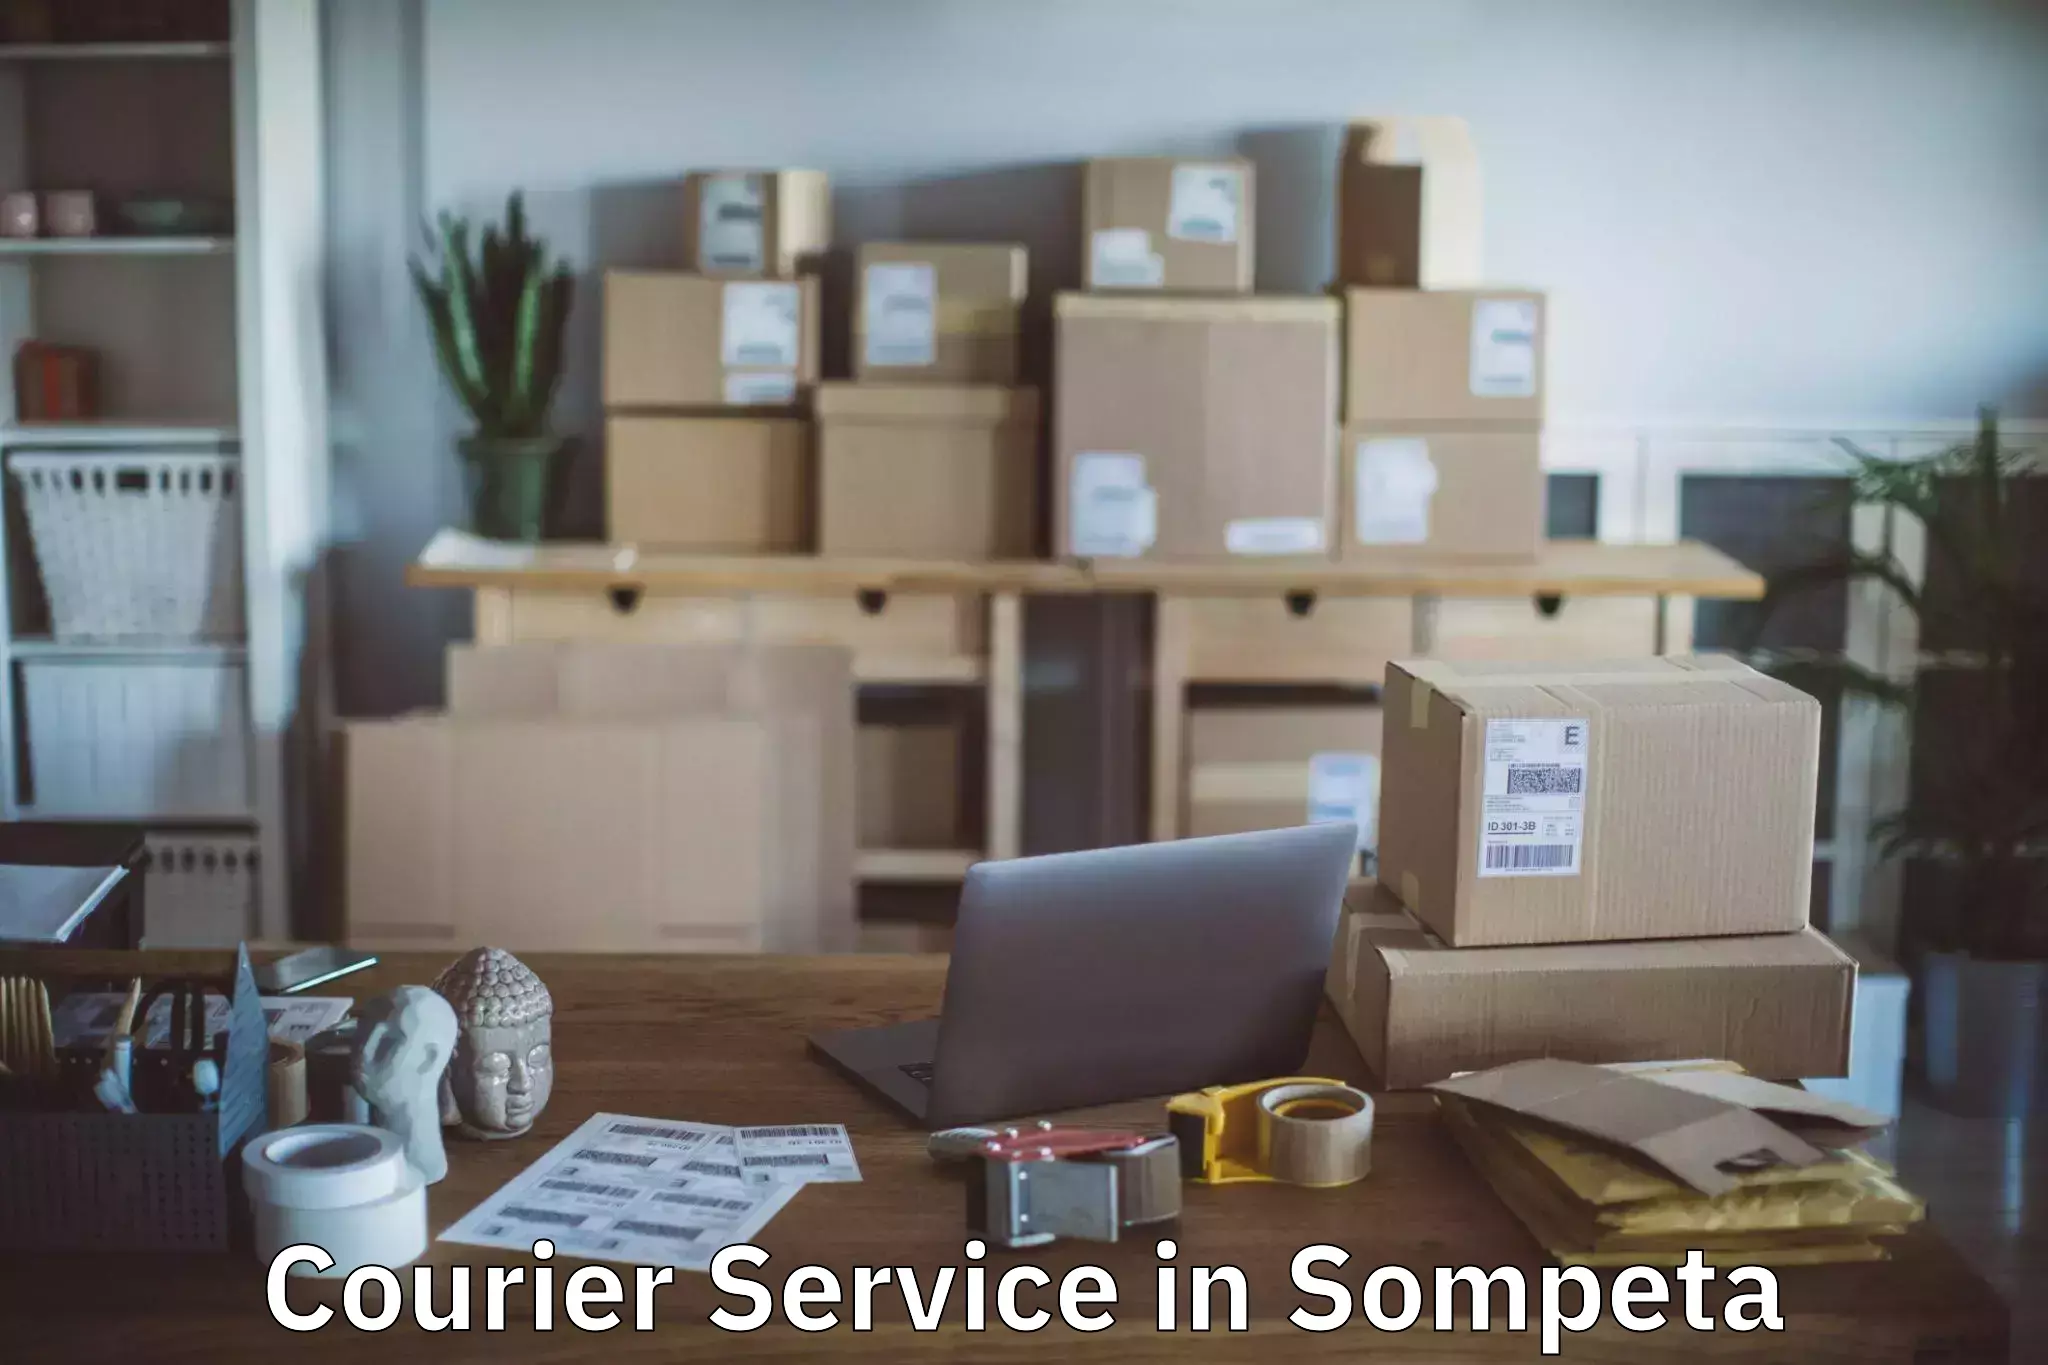 24/7 courier service in Sompeta